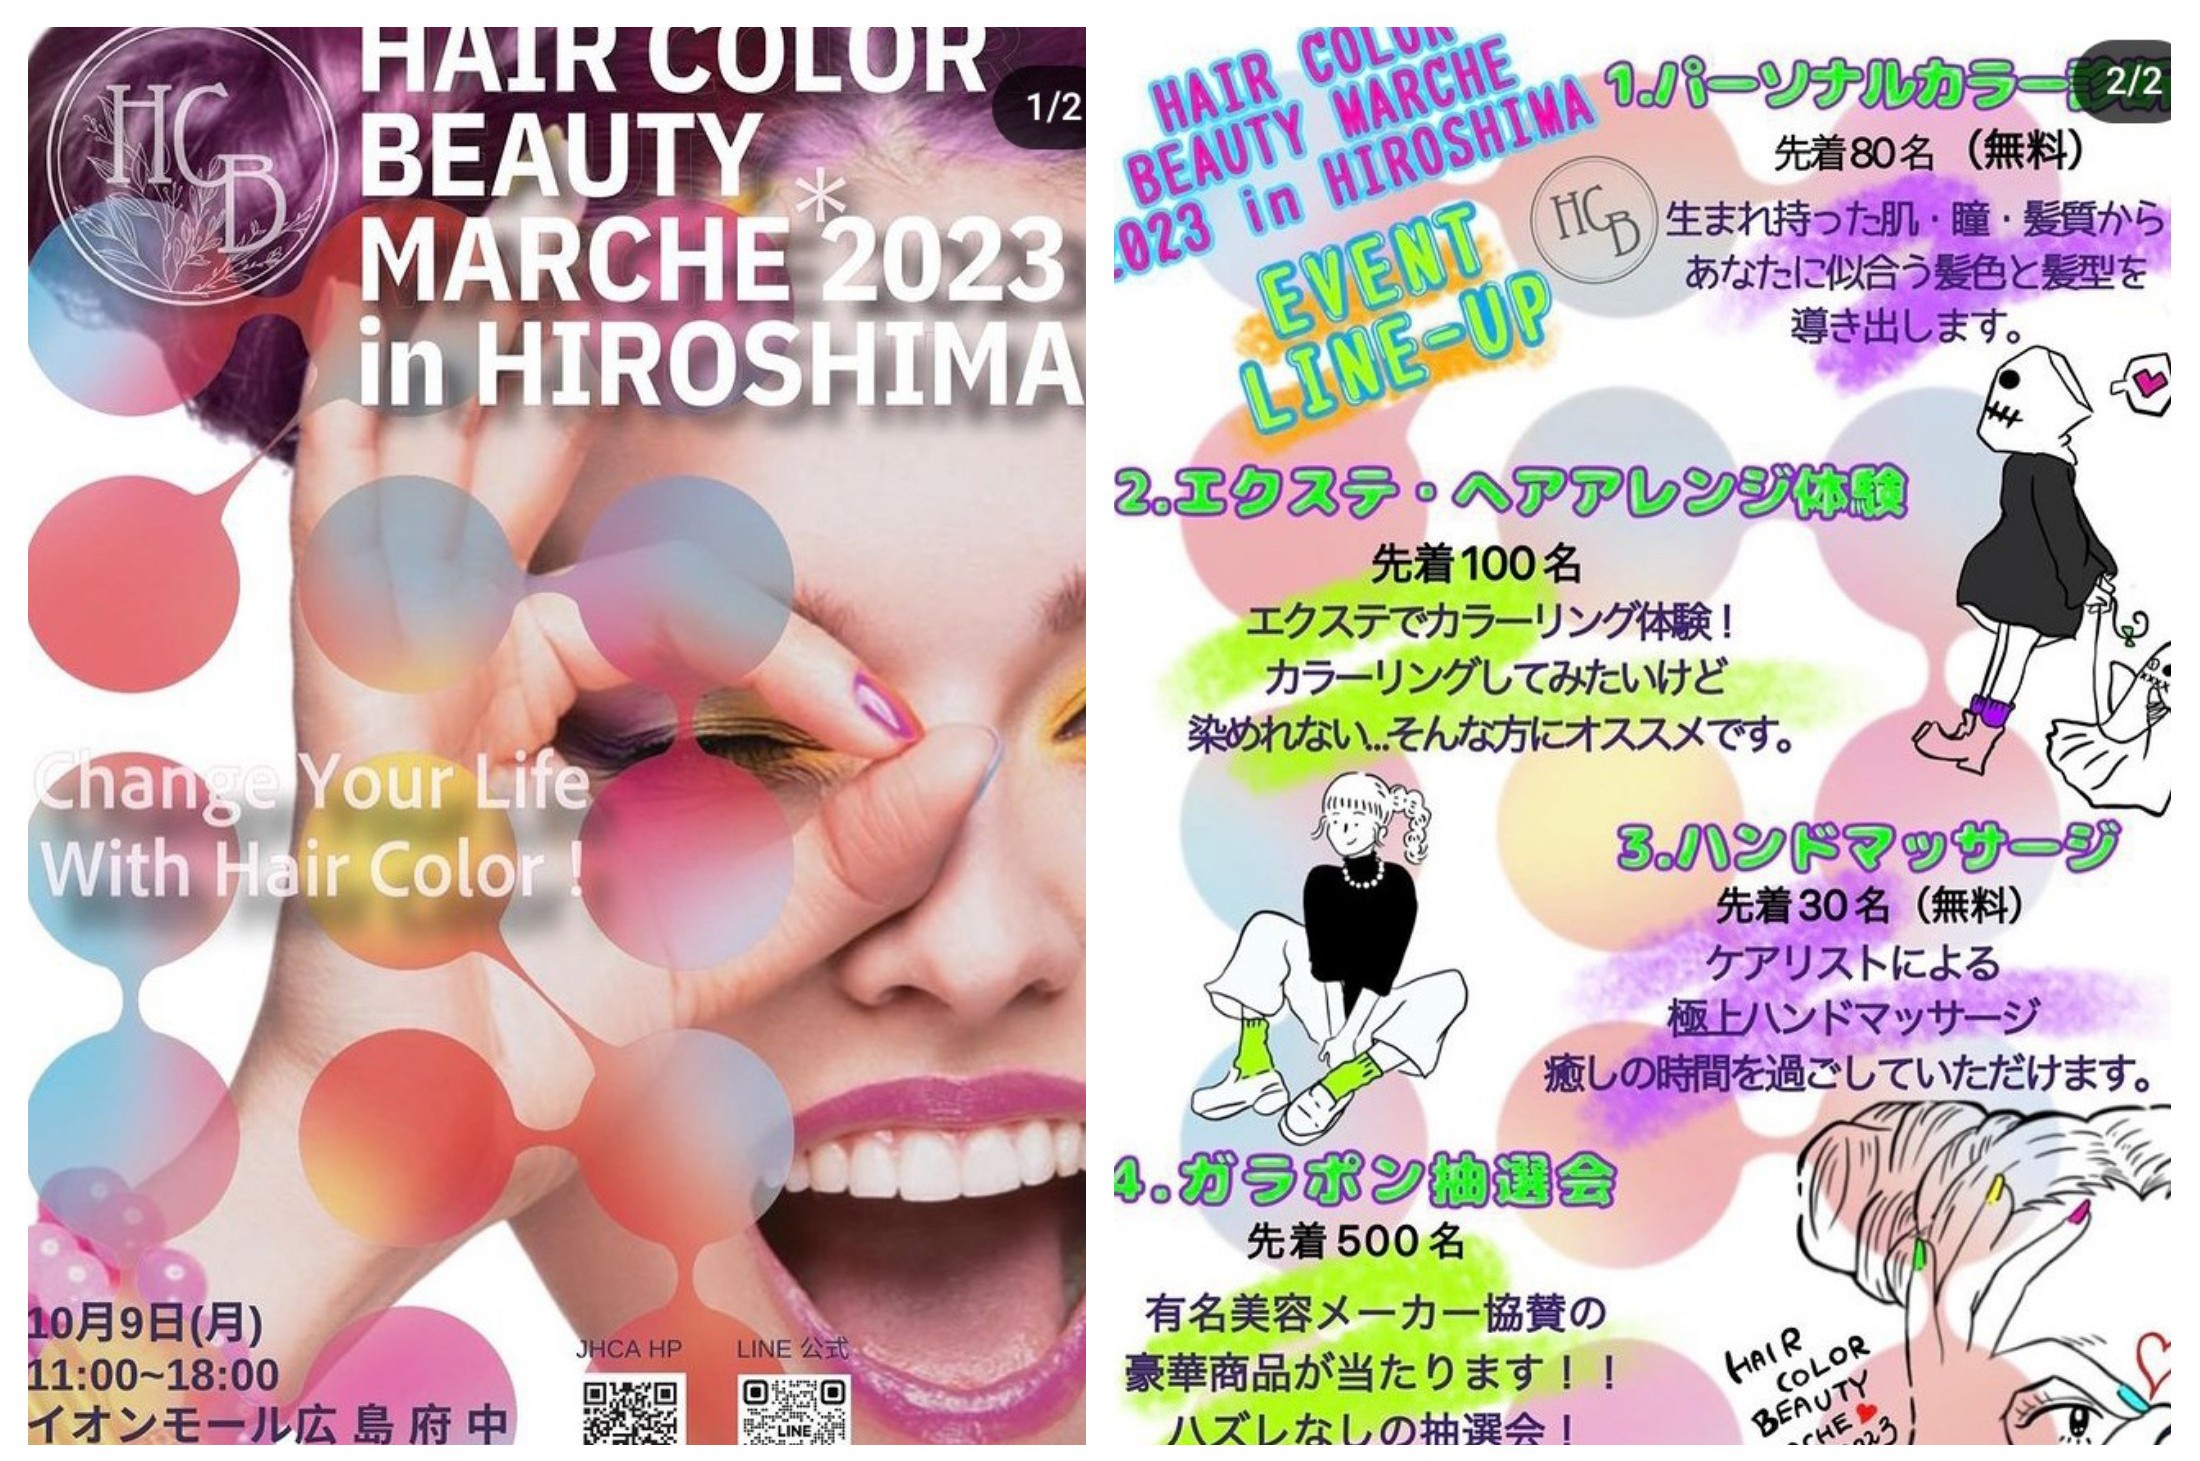 HAIR COLOR BEAUTY MARCHE 2023 in HIROSHIMA